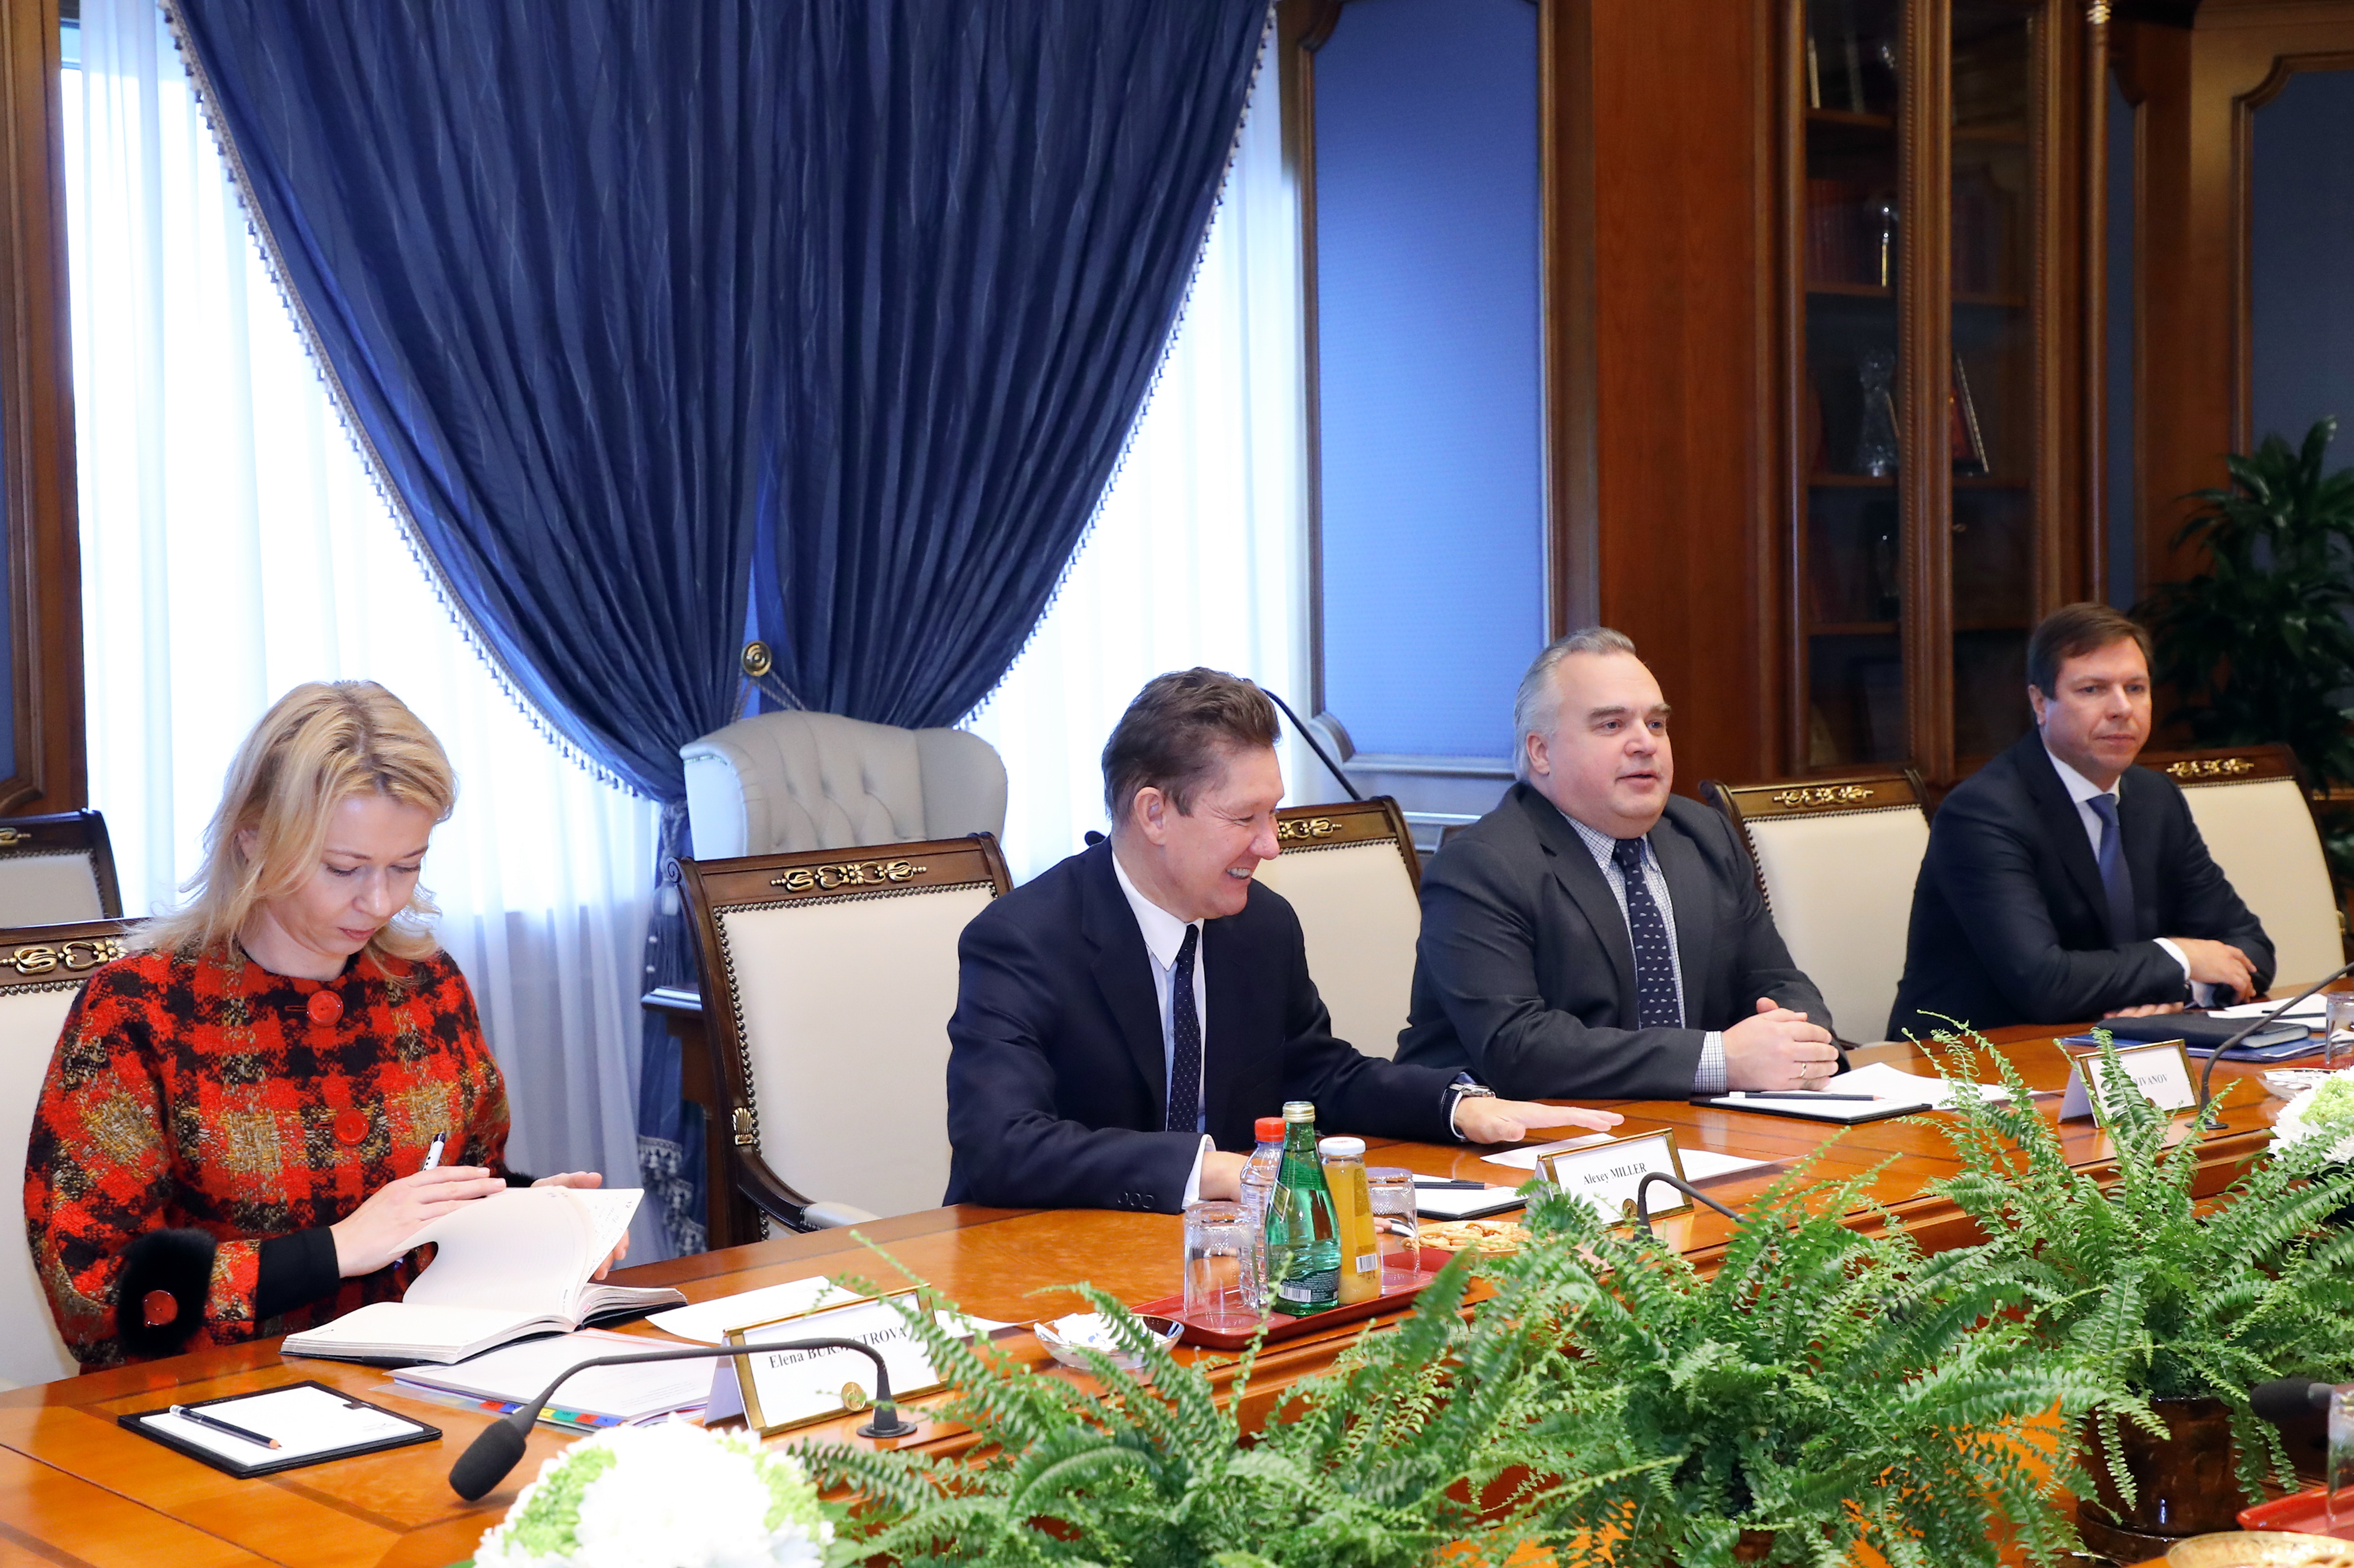 Gazprom and Fortum review cooperation-related issues